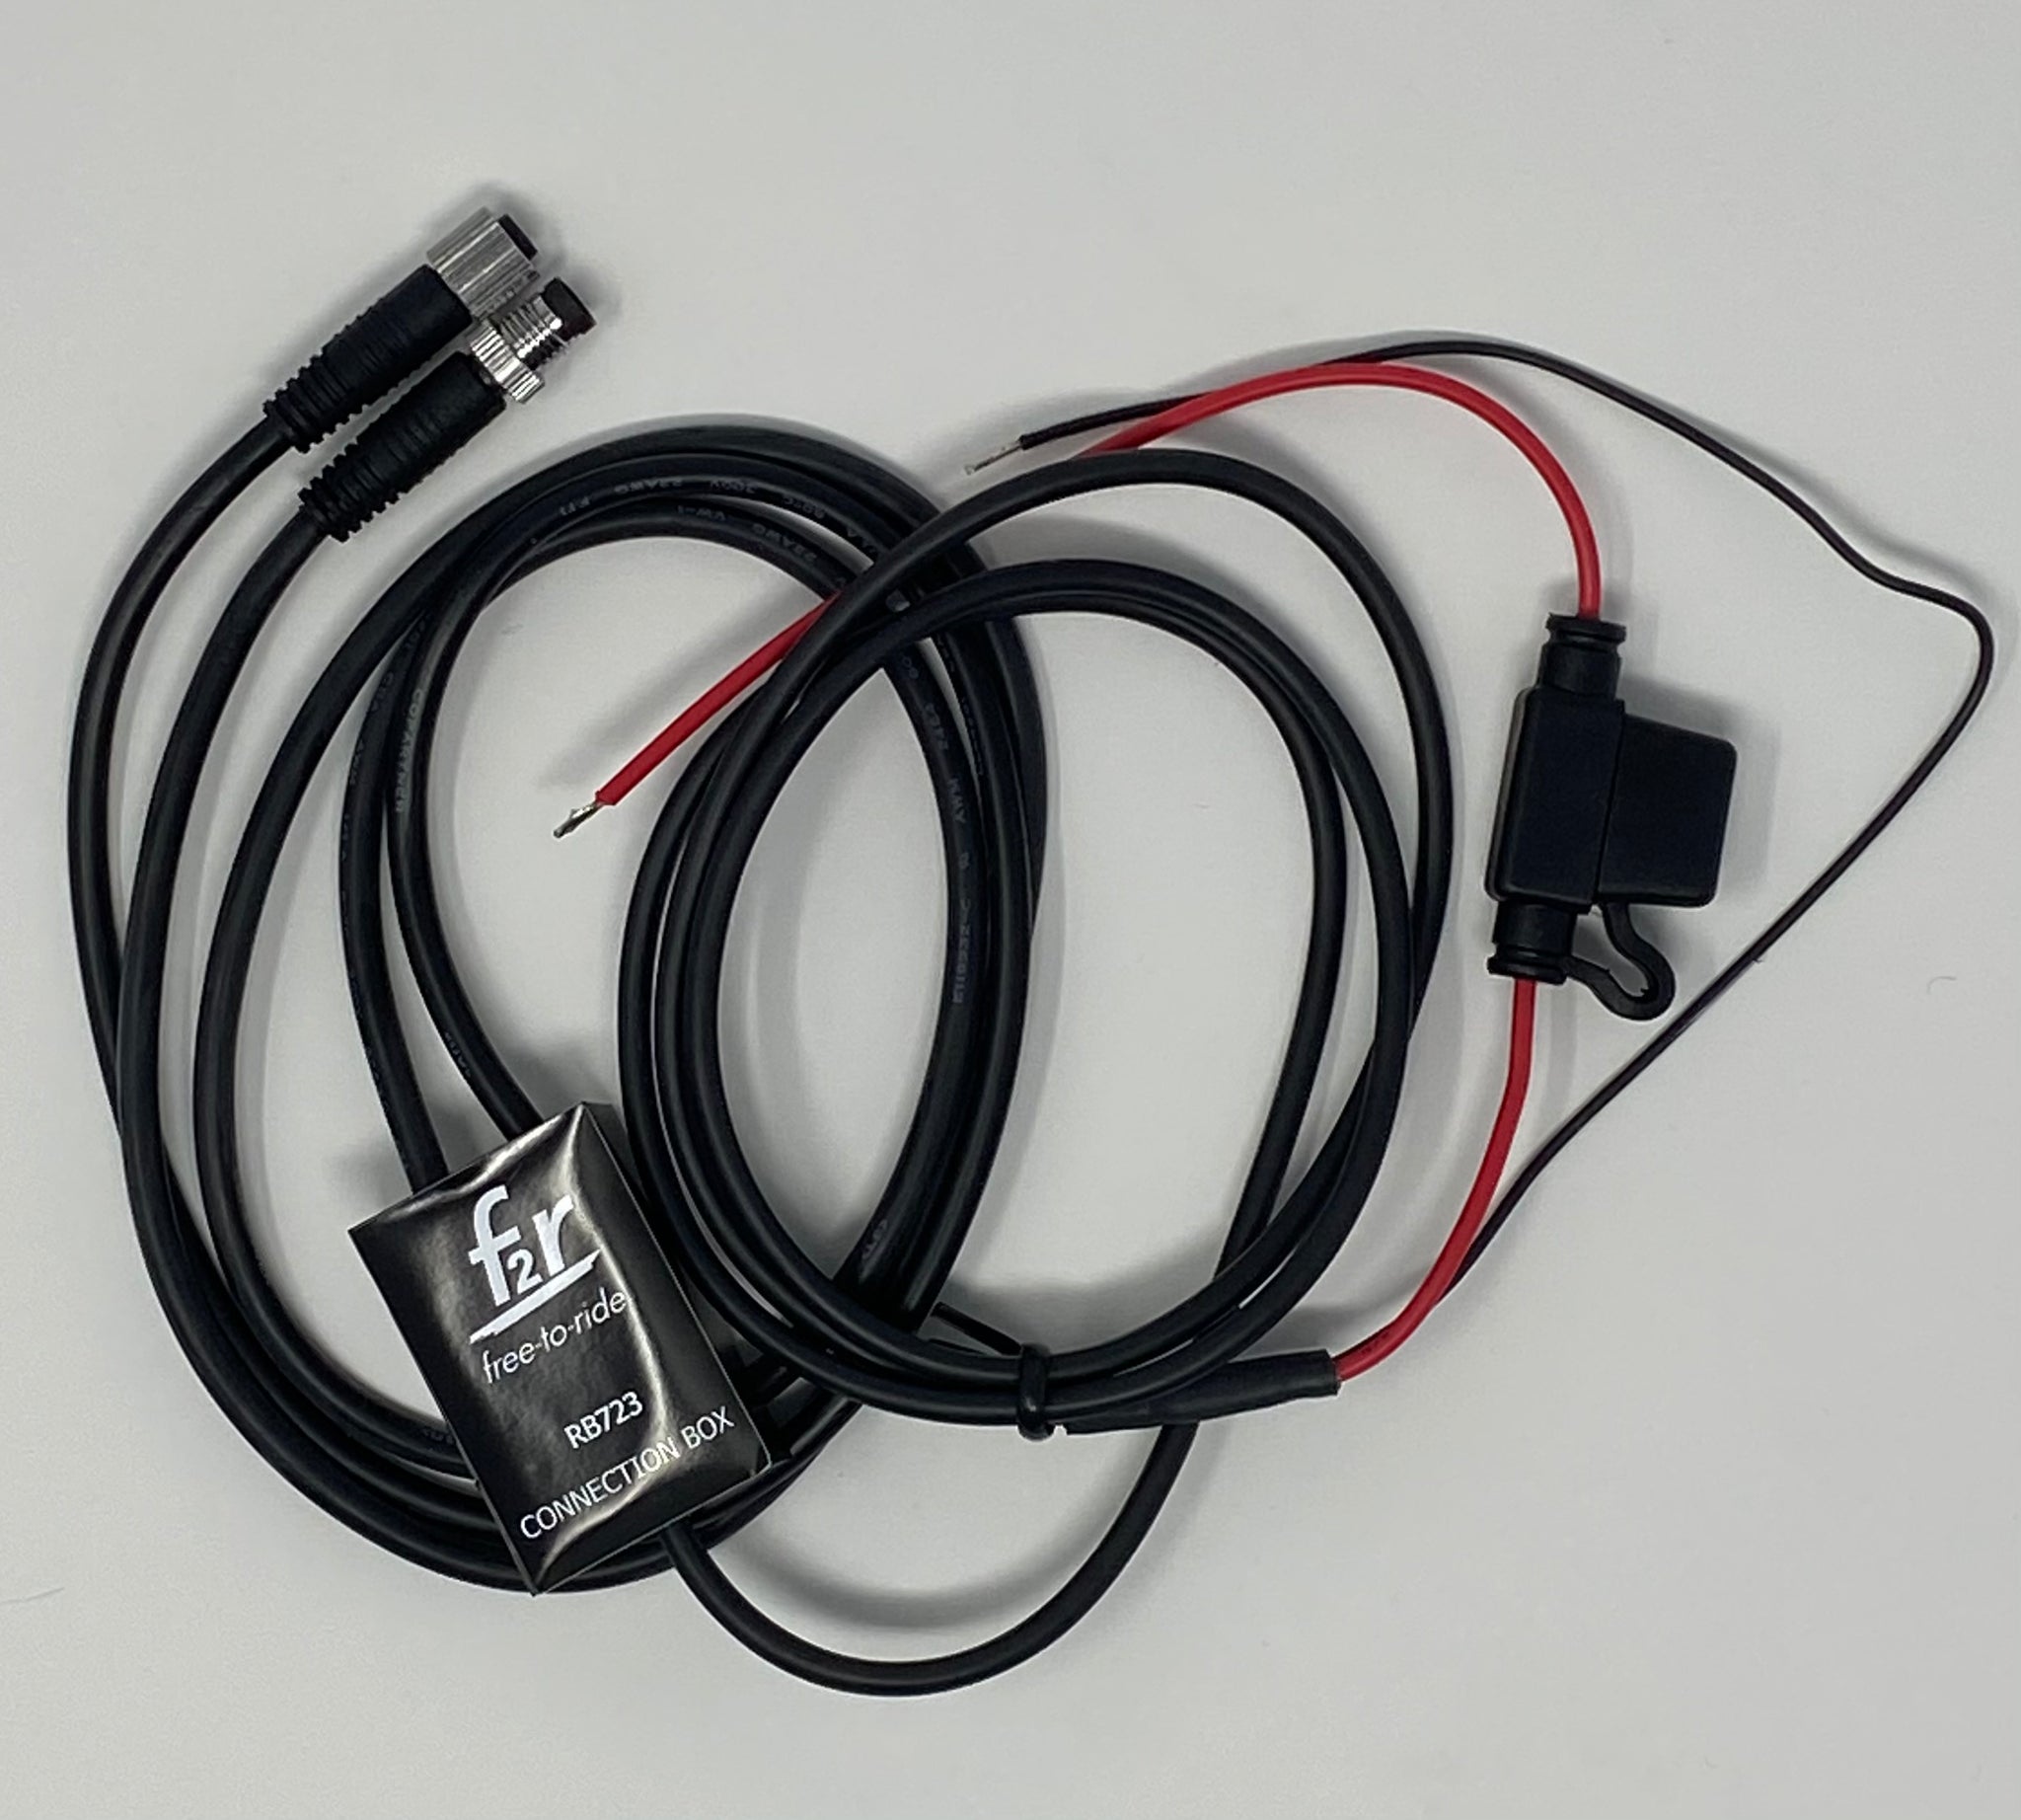 Power and Switch Connection Box for RB750 and RB850 Roadbooks